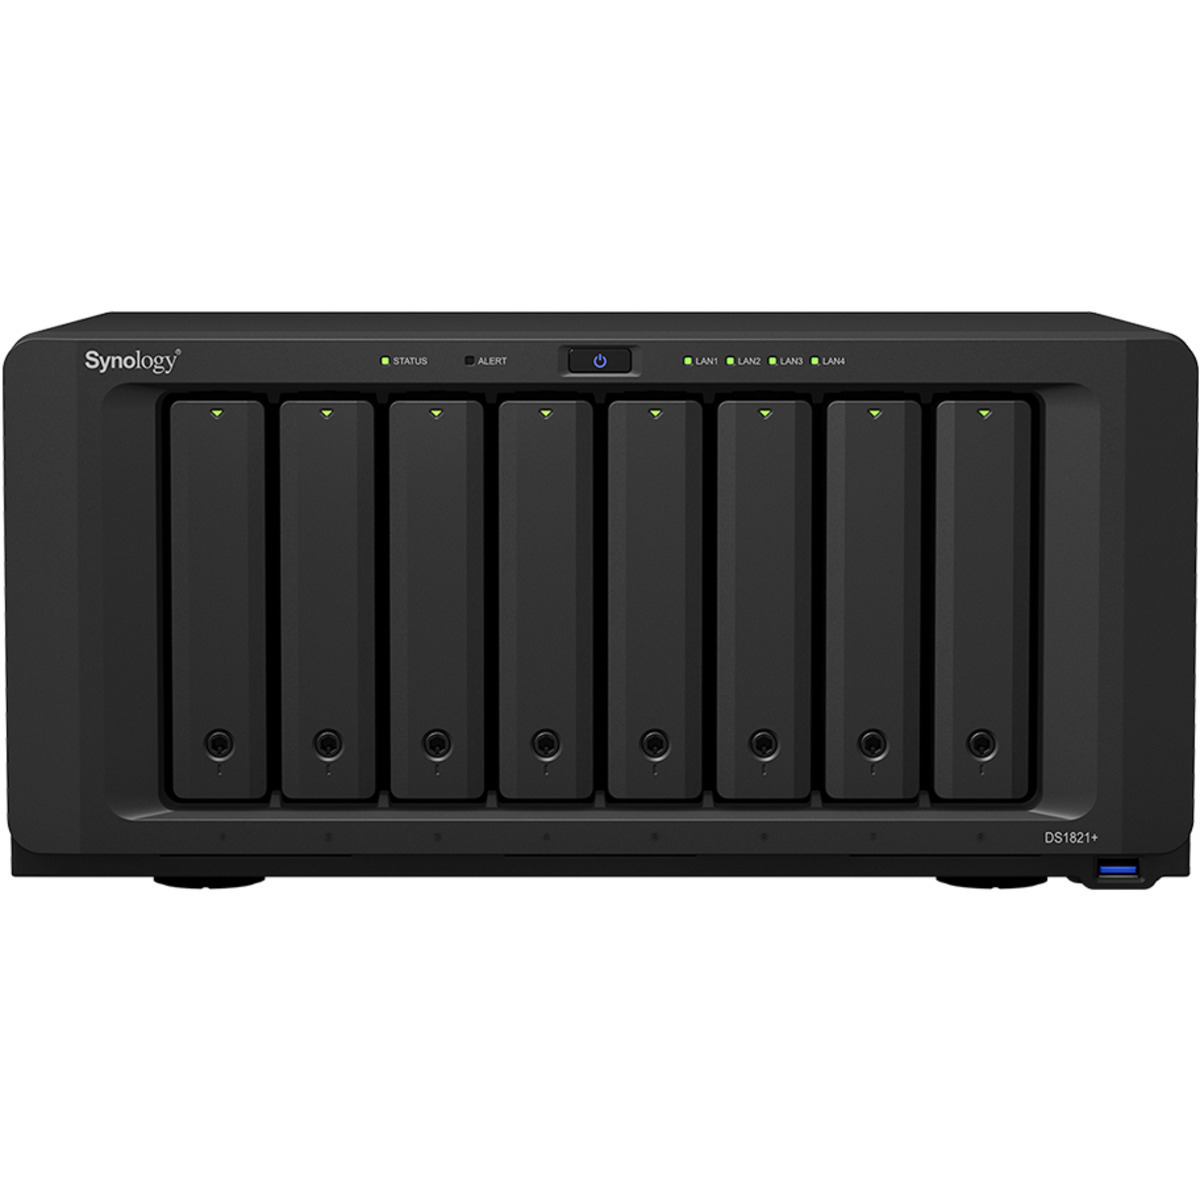 buy $8355 Synology DiskStation DS1821+ 64tb Desktop NAS - Network Attached Storage Device 8x8000gb Samsung 870 QVO MZ-77Q8T0 2.5 SATA 6Gb/s SSD CONSUMER Class Drives Installed - Burn-In Tested - FREE RAM UPGRADE - nas headquarters buy network attached storage server device das new raid-5 free shipping usa christmas new year holiday sale DiskStation DS1821+